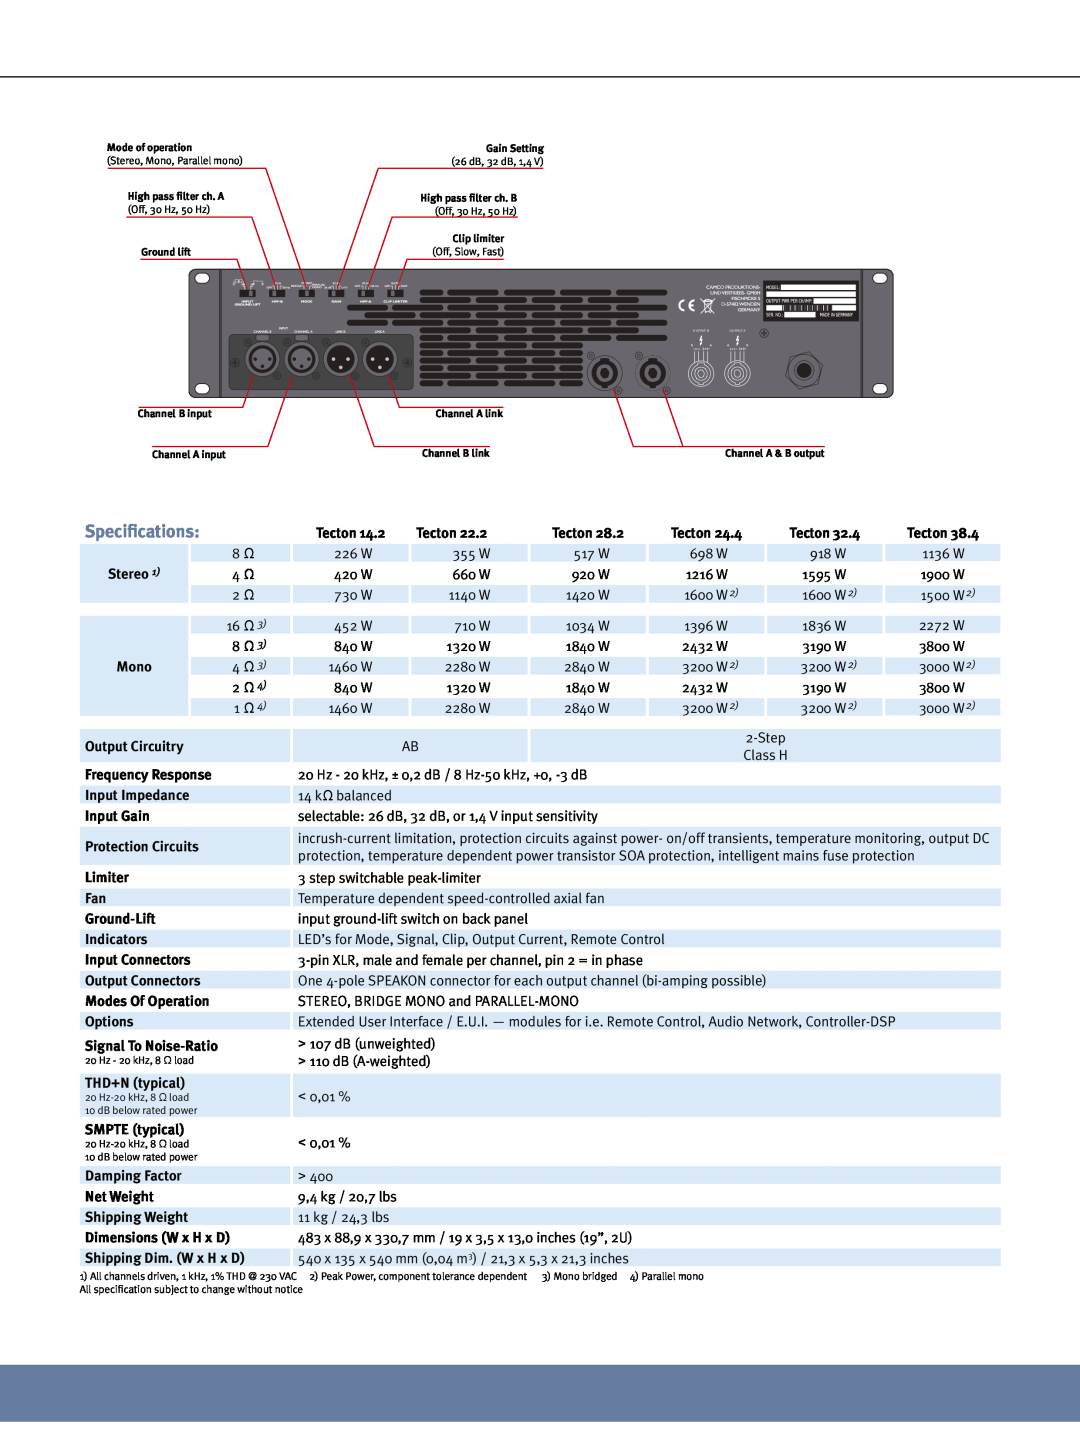 Camco Amplifier manual Specifications, Tecton 